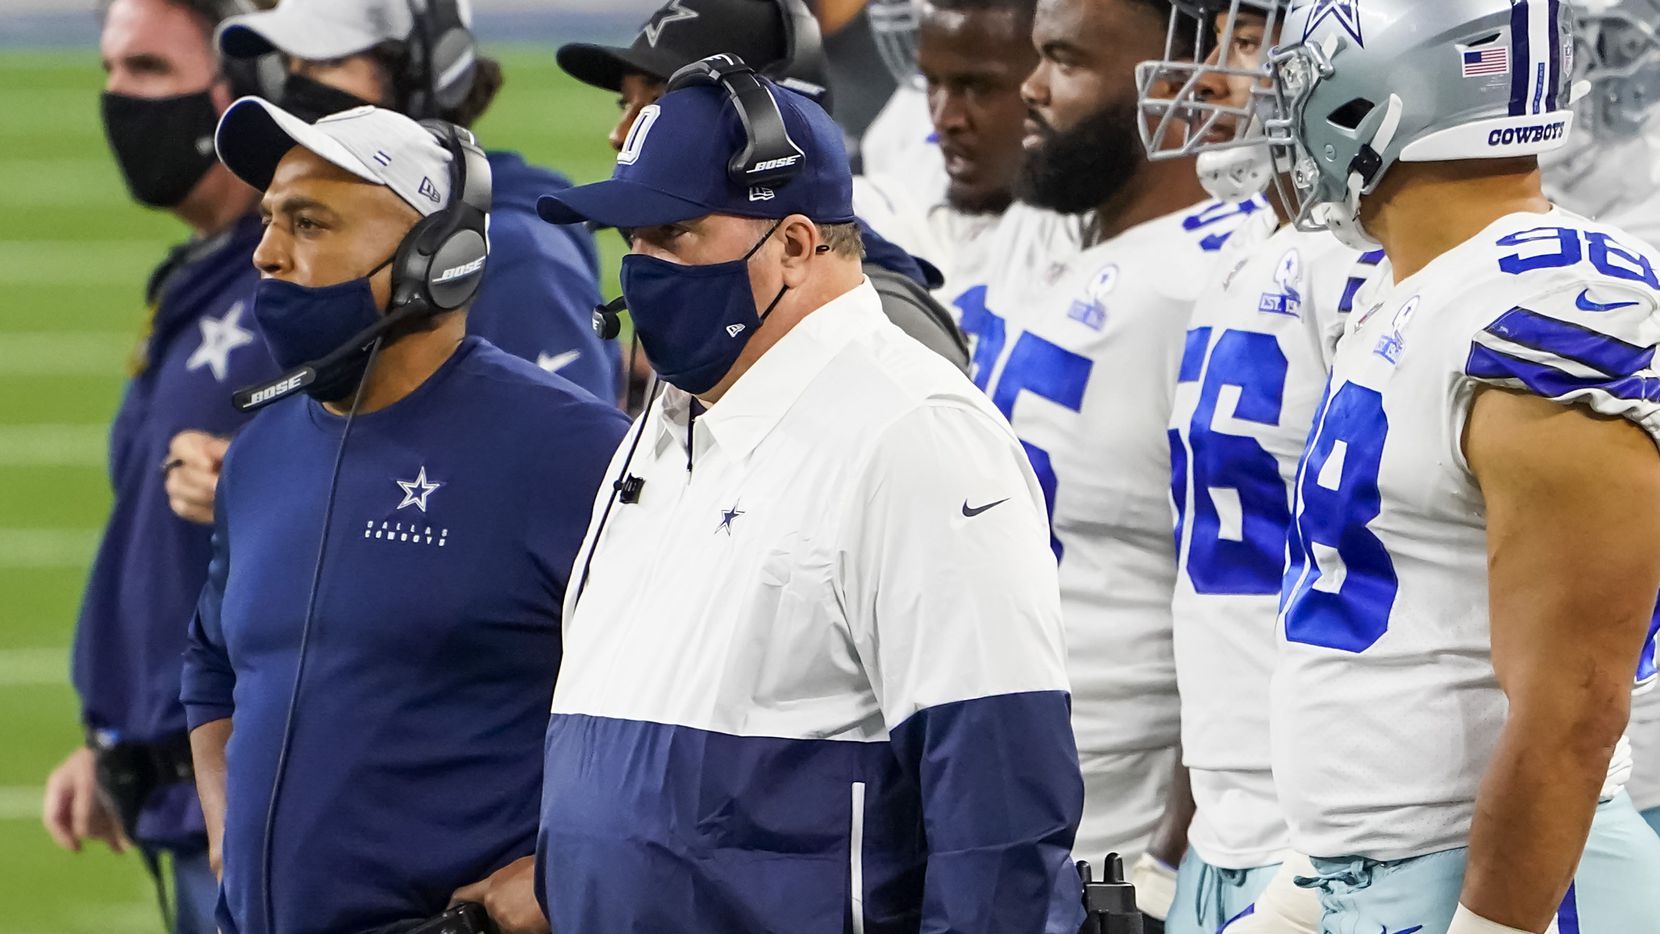 Cowboys Players Publicly Rip Coaching Staff "They Just Aren't Good At